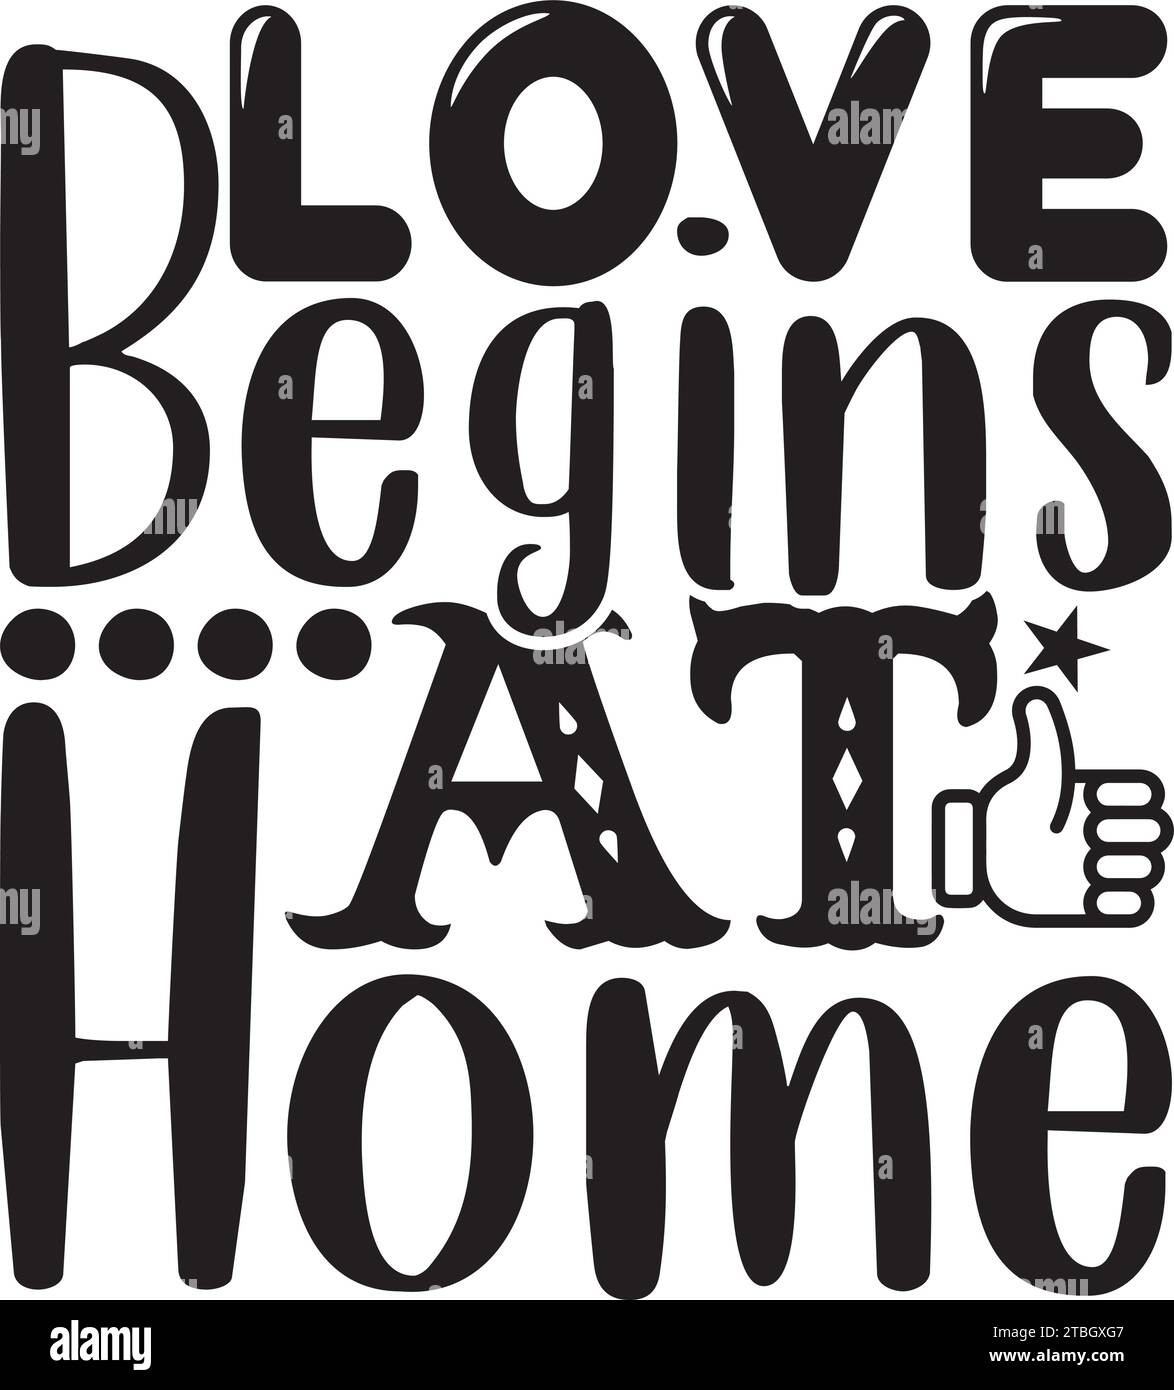 Love Begins at Home SVG Stock Vector